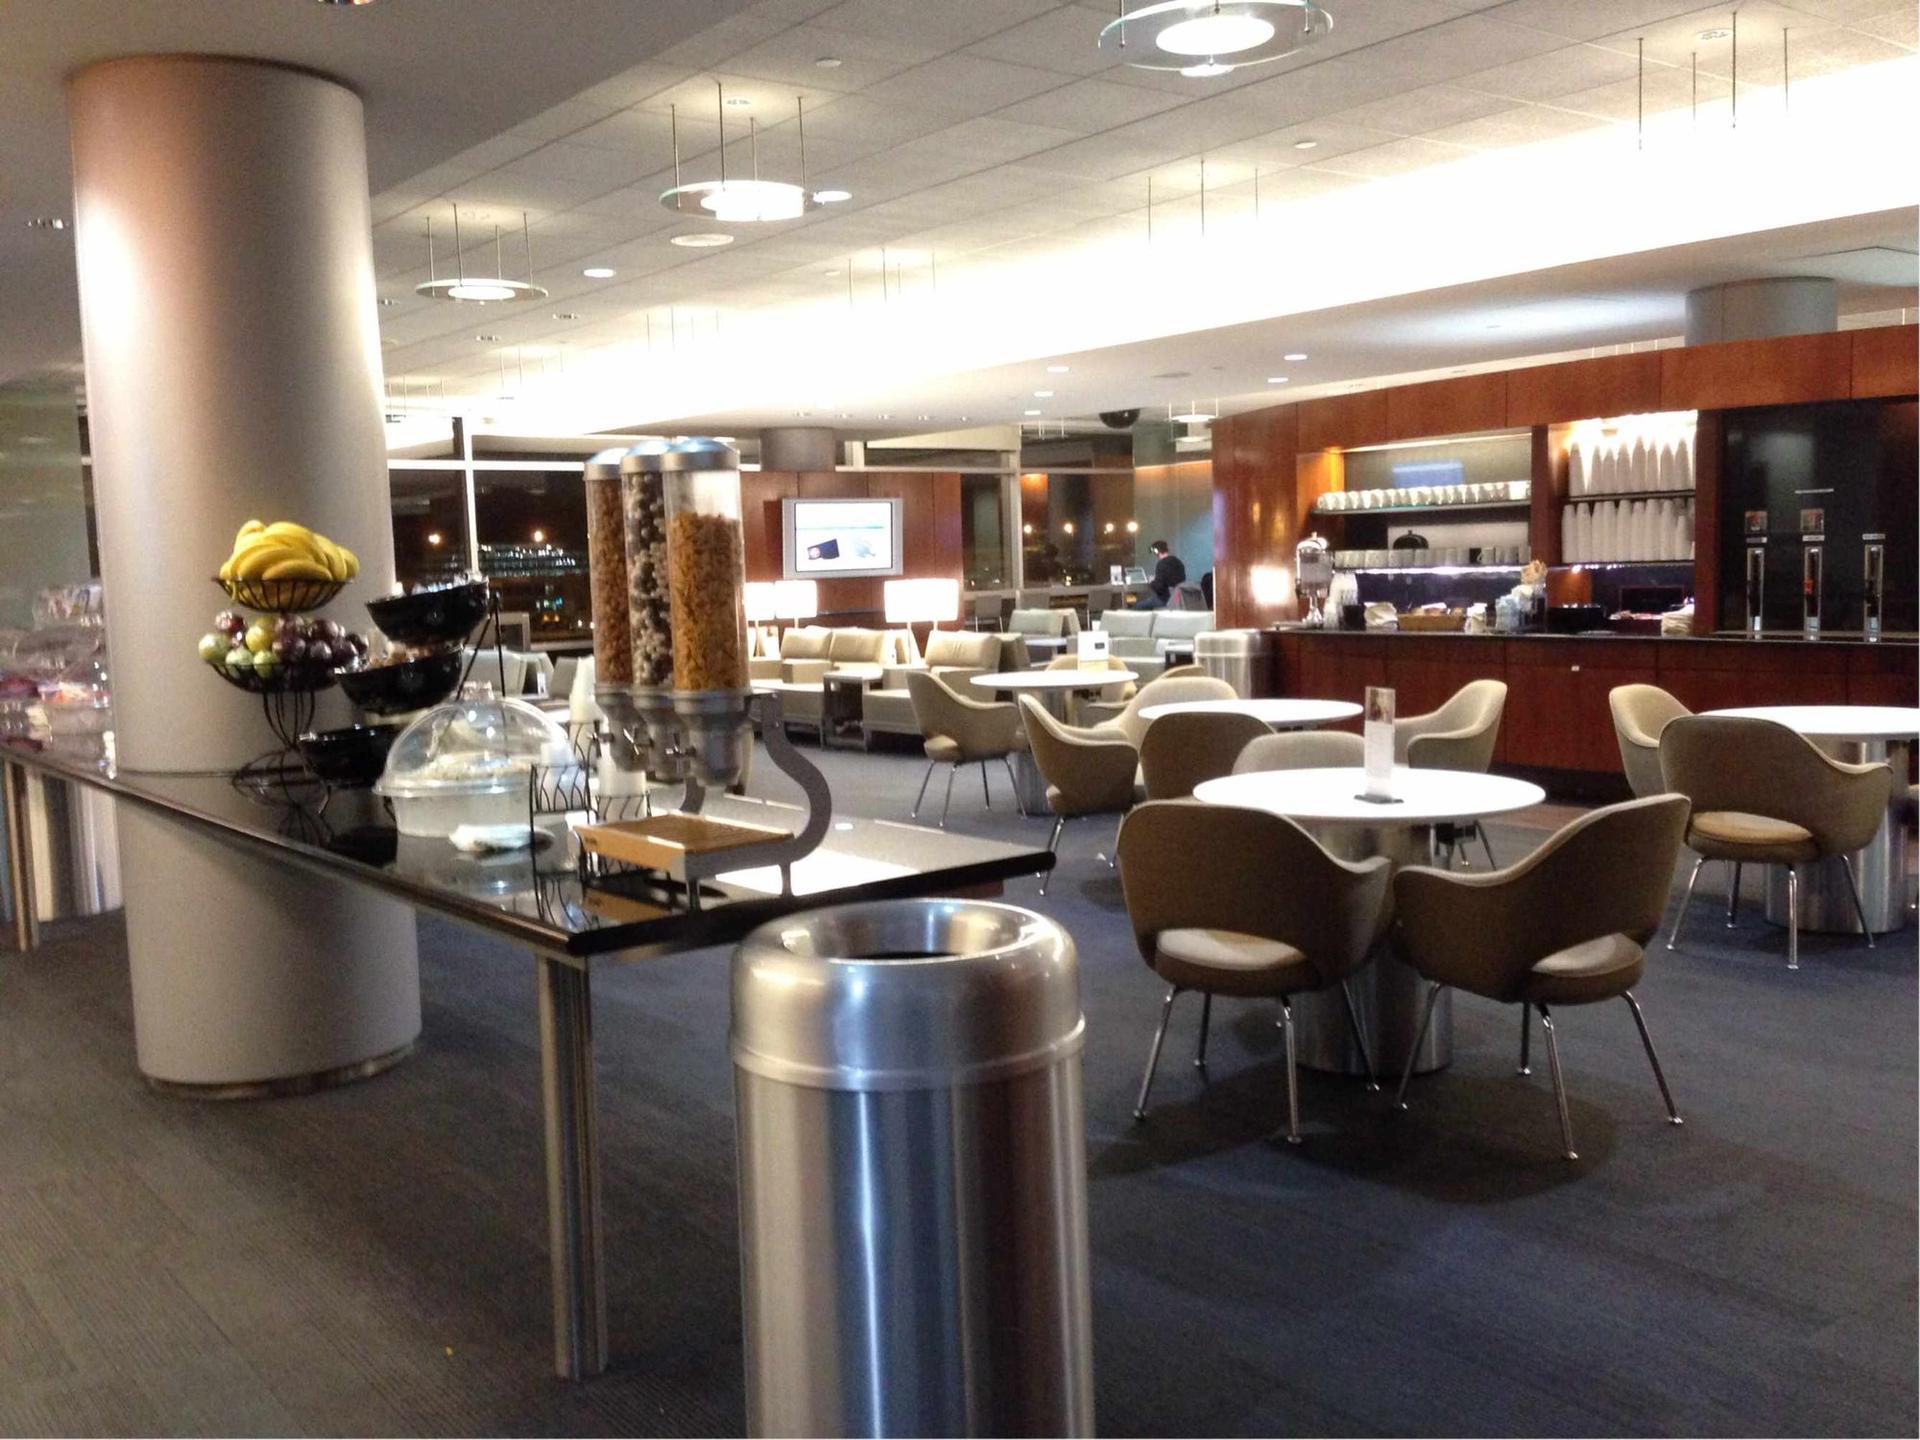 United Airlines United Club (Gate B32)  image 3 of 35